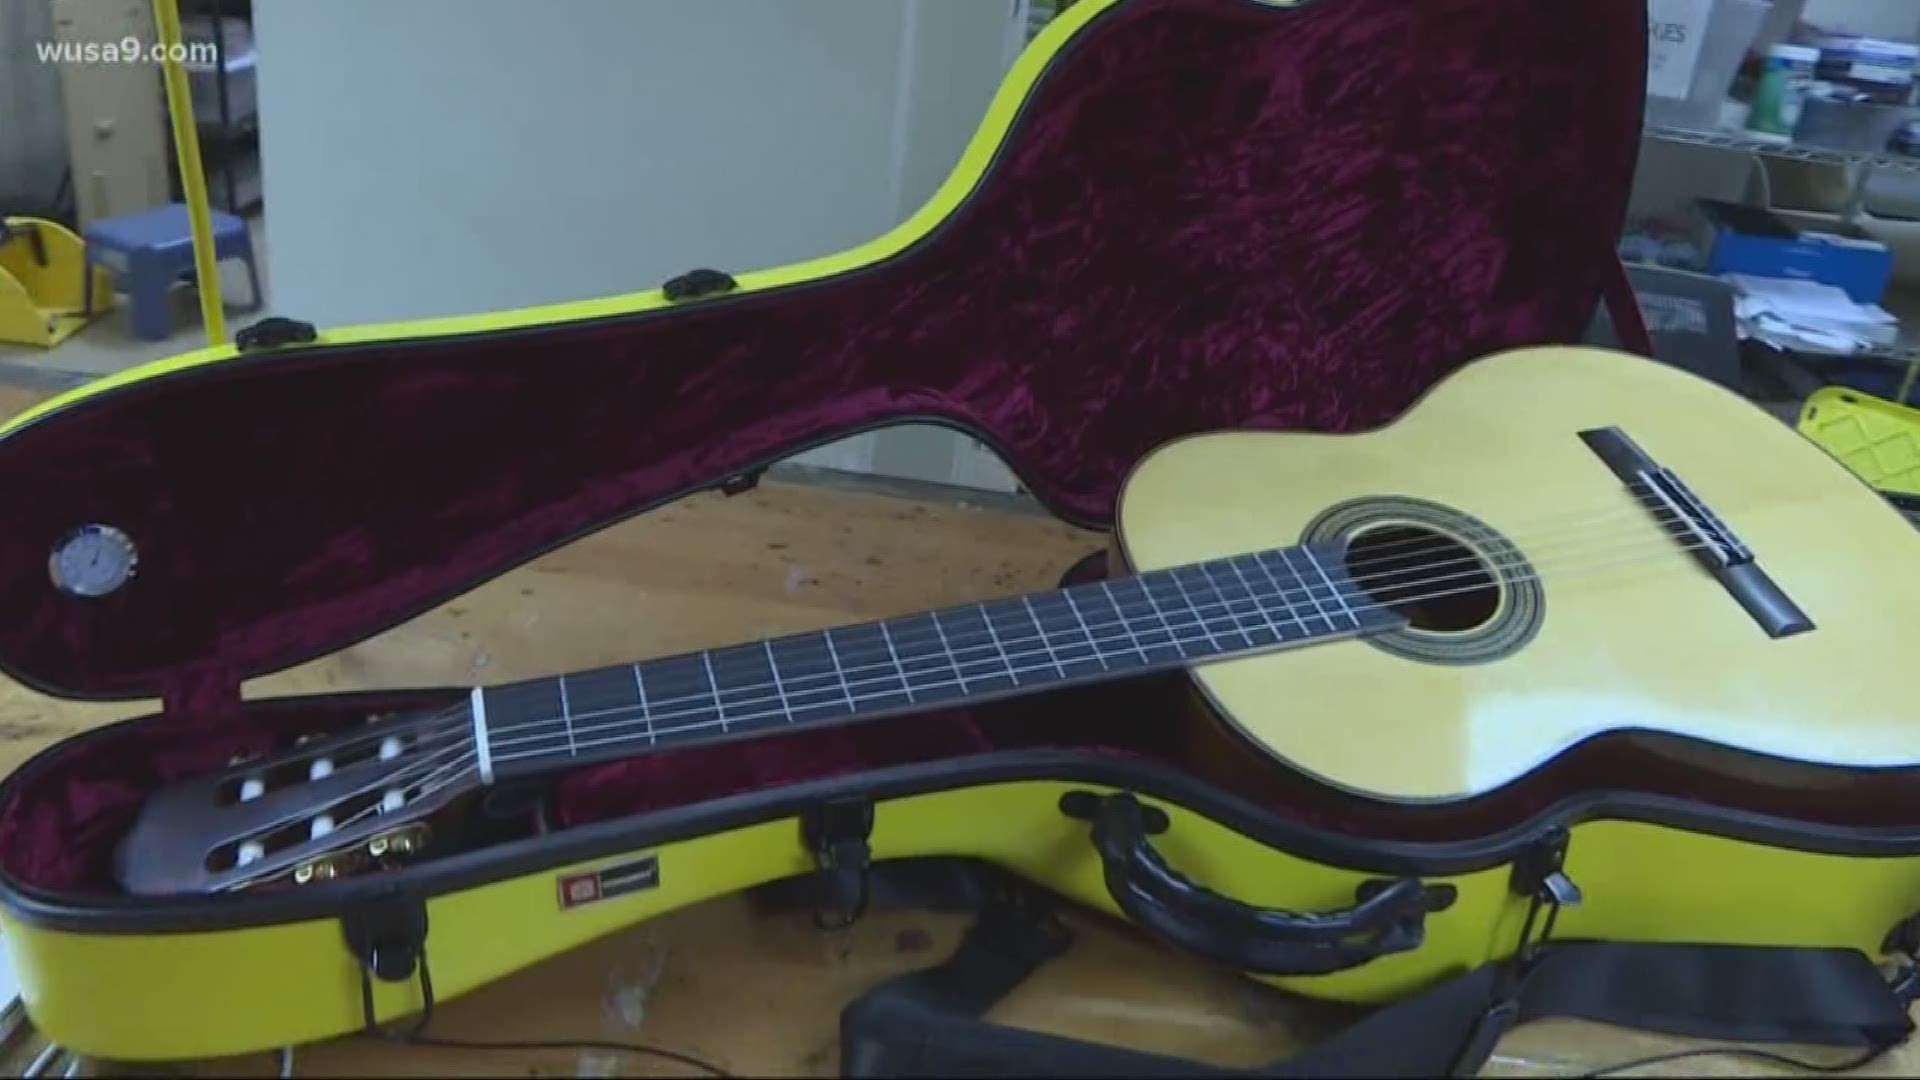 The guitar works with sensors that go directly into its fretboard.